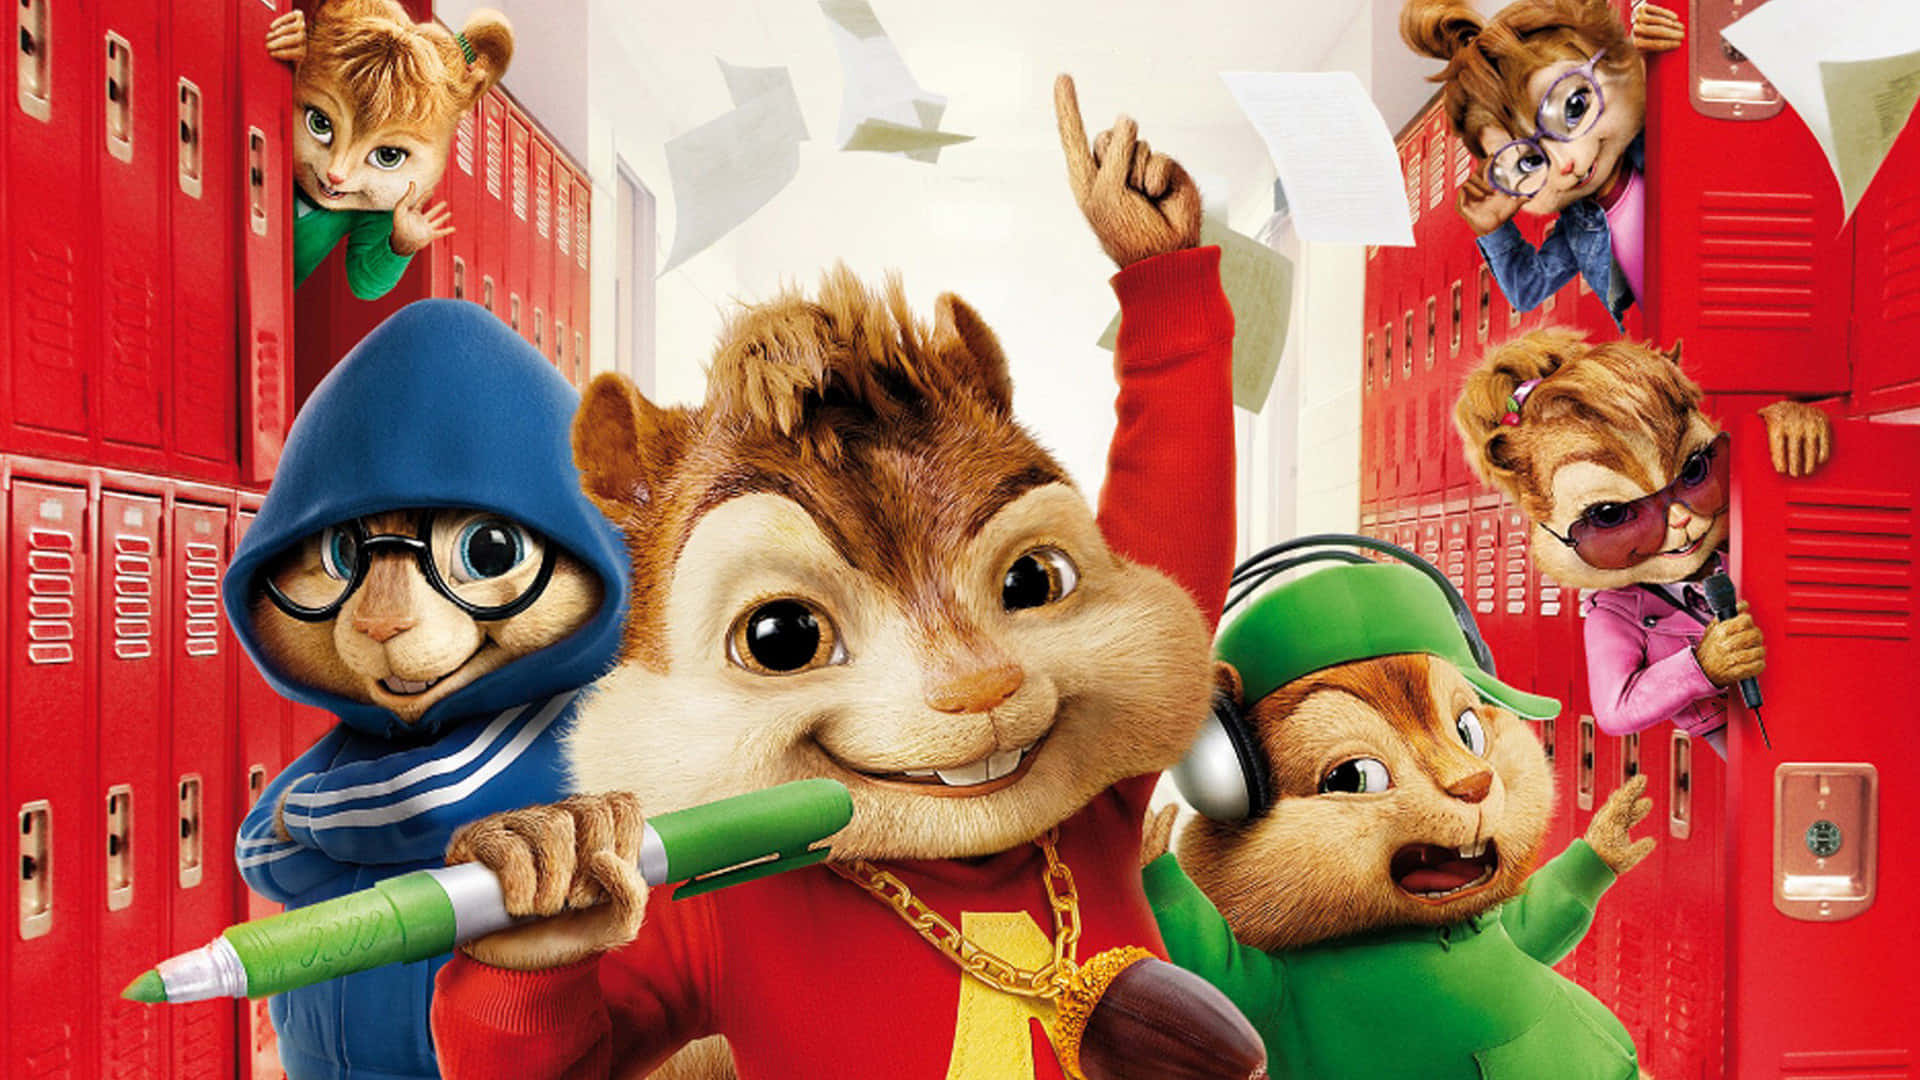 "Alvin, Simon and Theodore of Alvin and The Chipmunks, ready for adventure!"